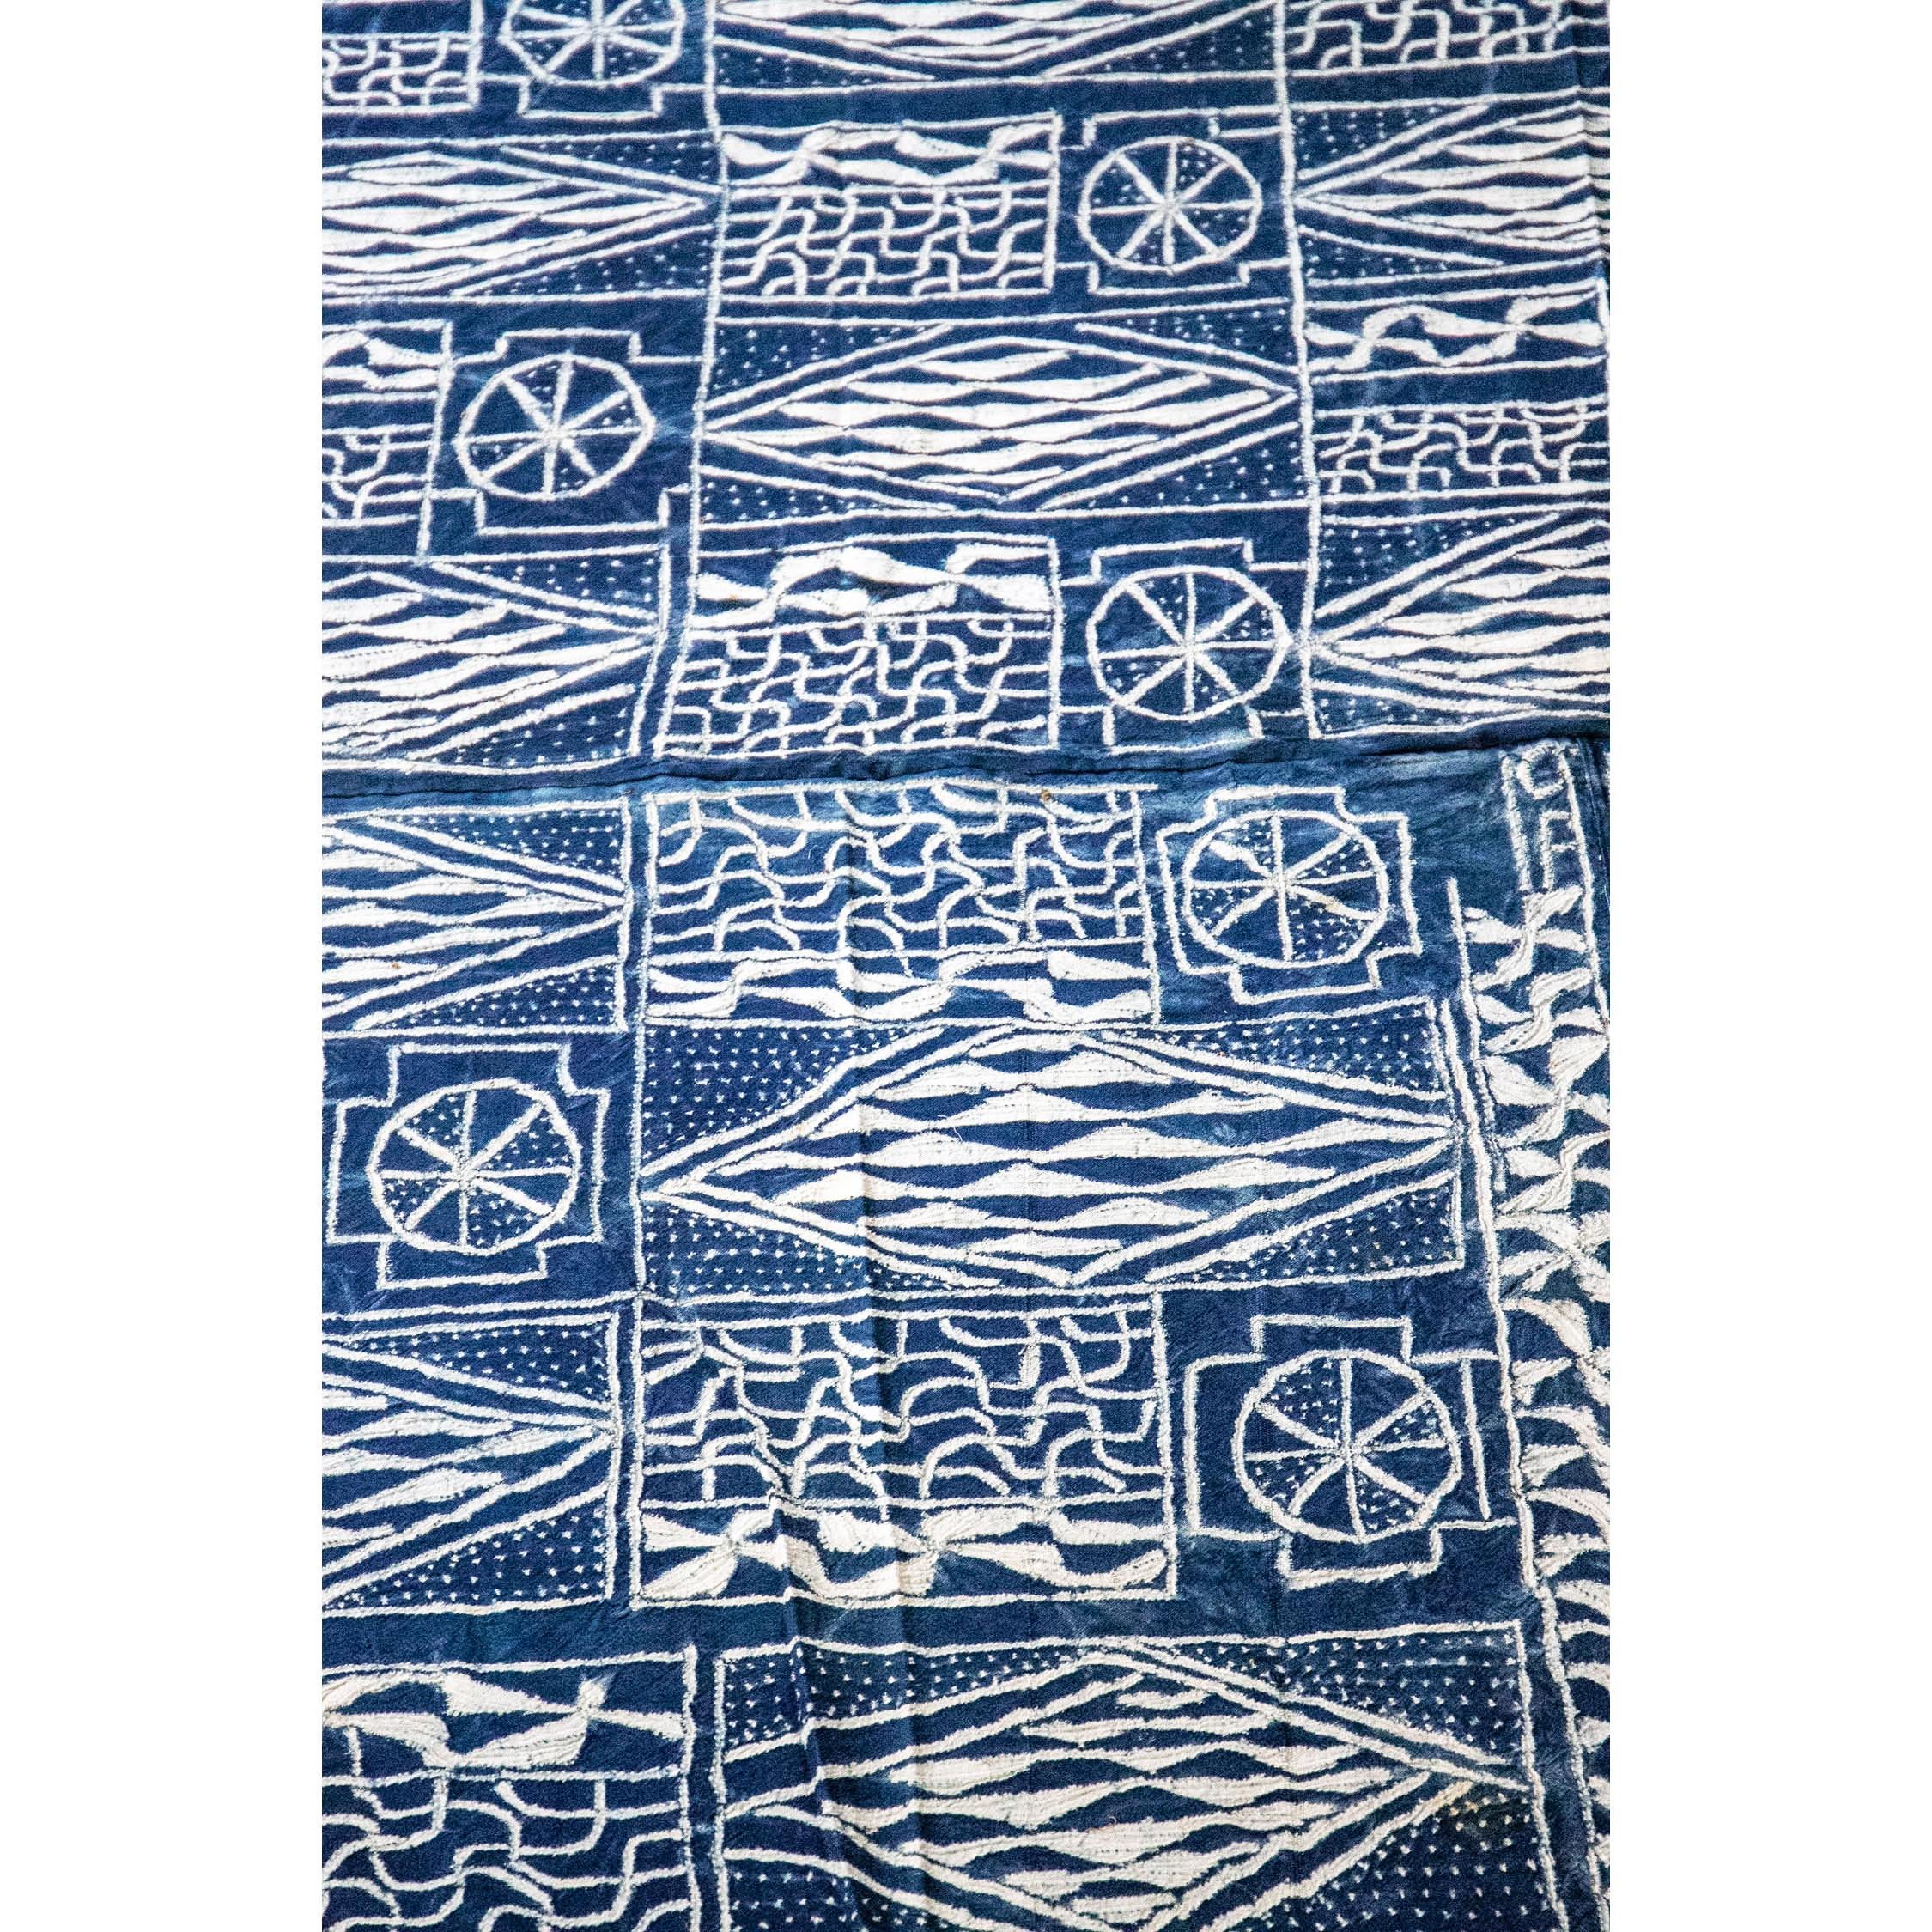 Large Vintage ‘Ndop’ Indigo Cloth or Textile Mid 20th C or Earlier   For Sale 2